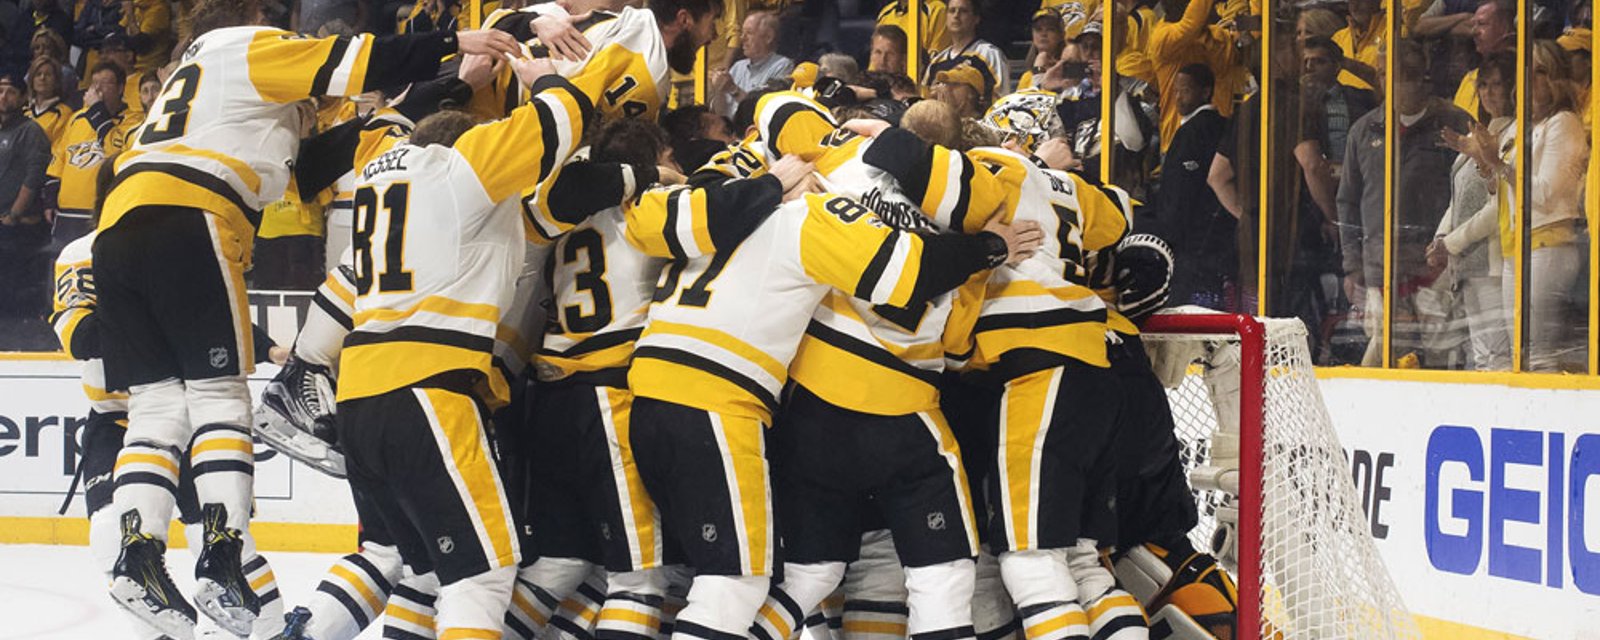 Your call: Will the Penguins three-peat in 2018?